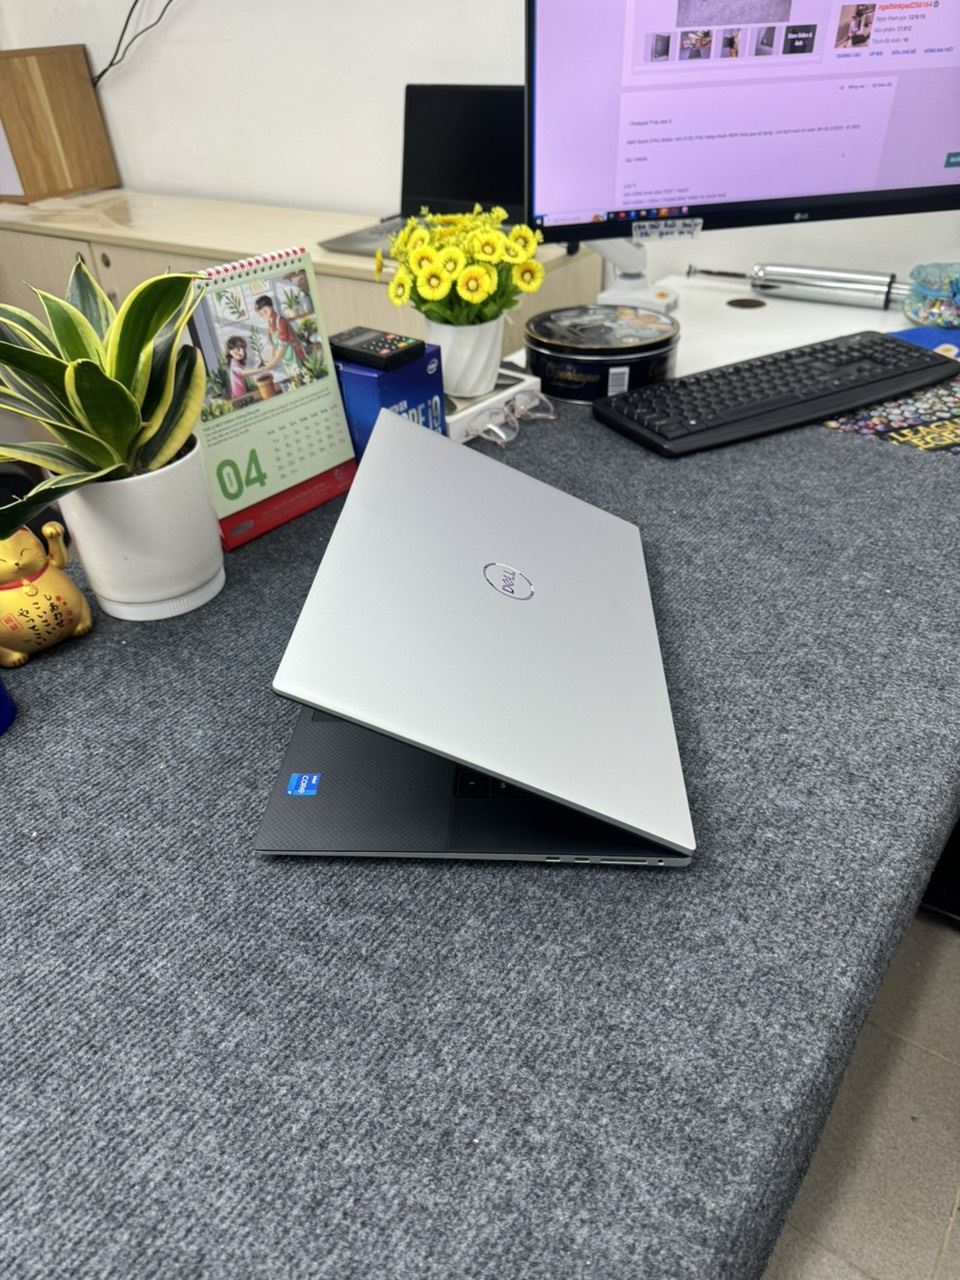 Dell XPS 17 9710